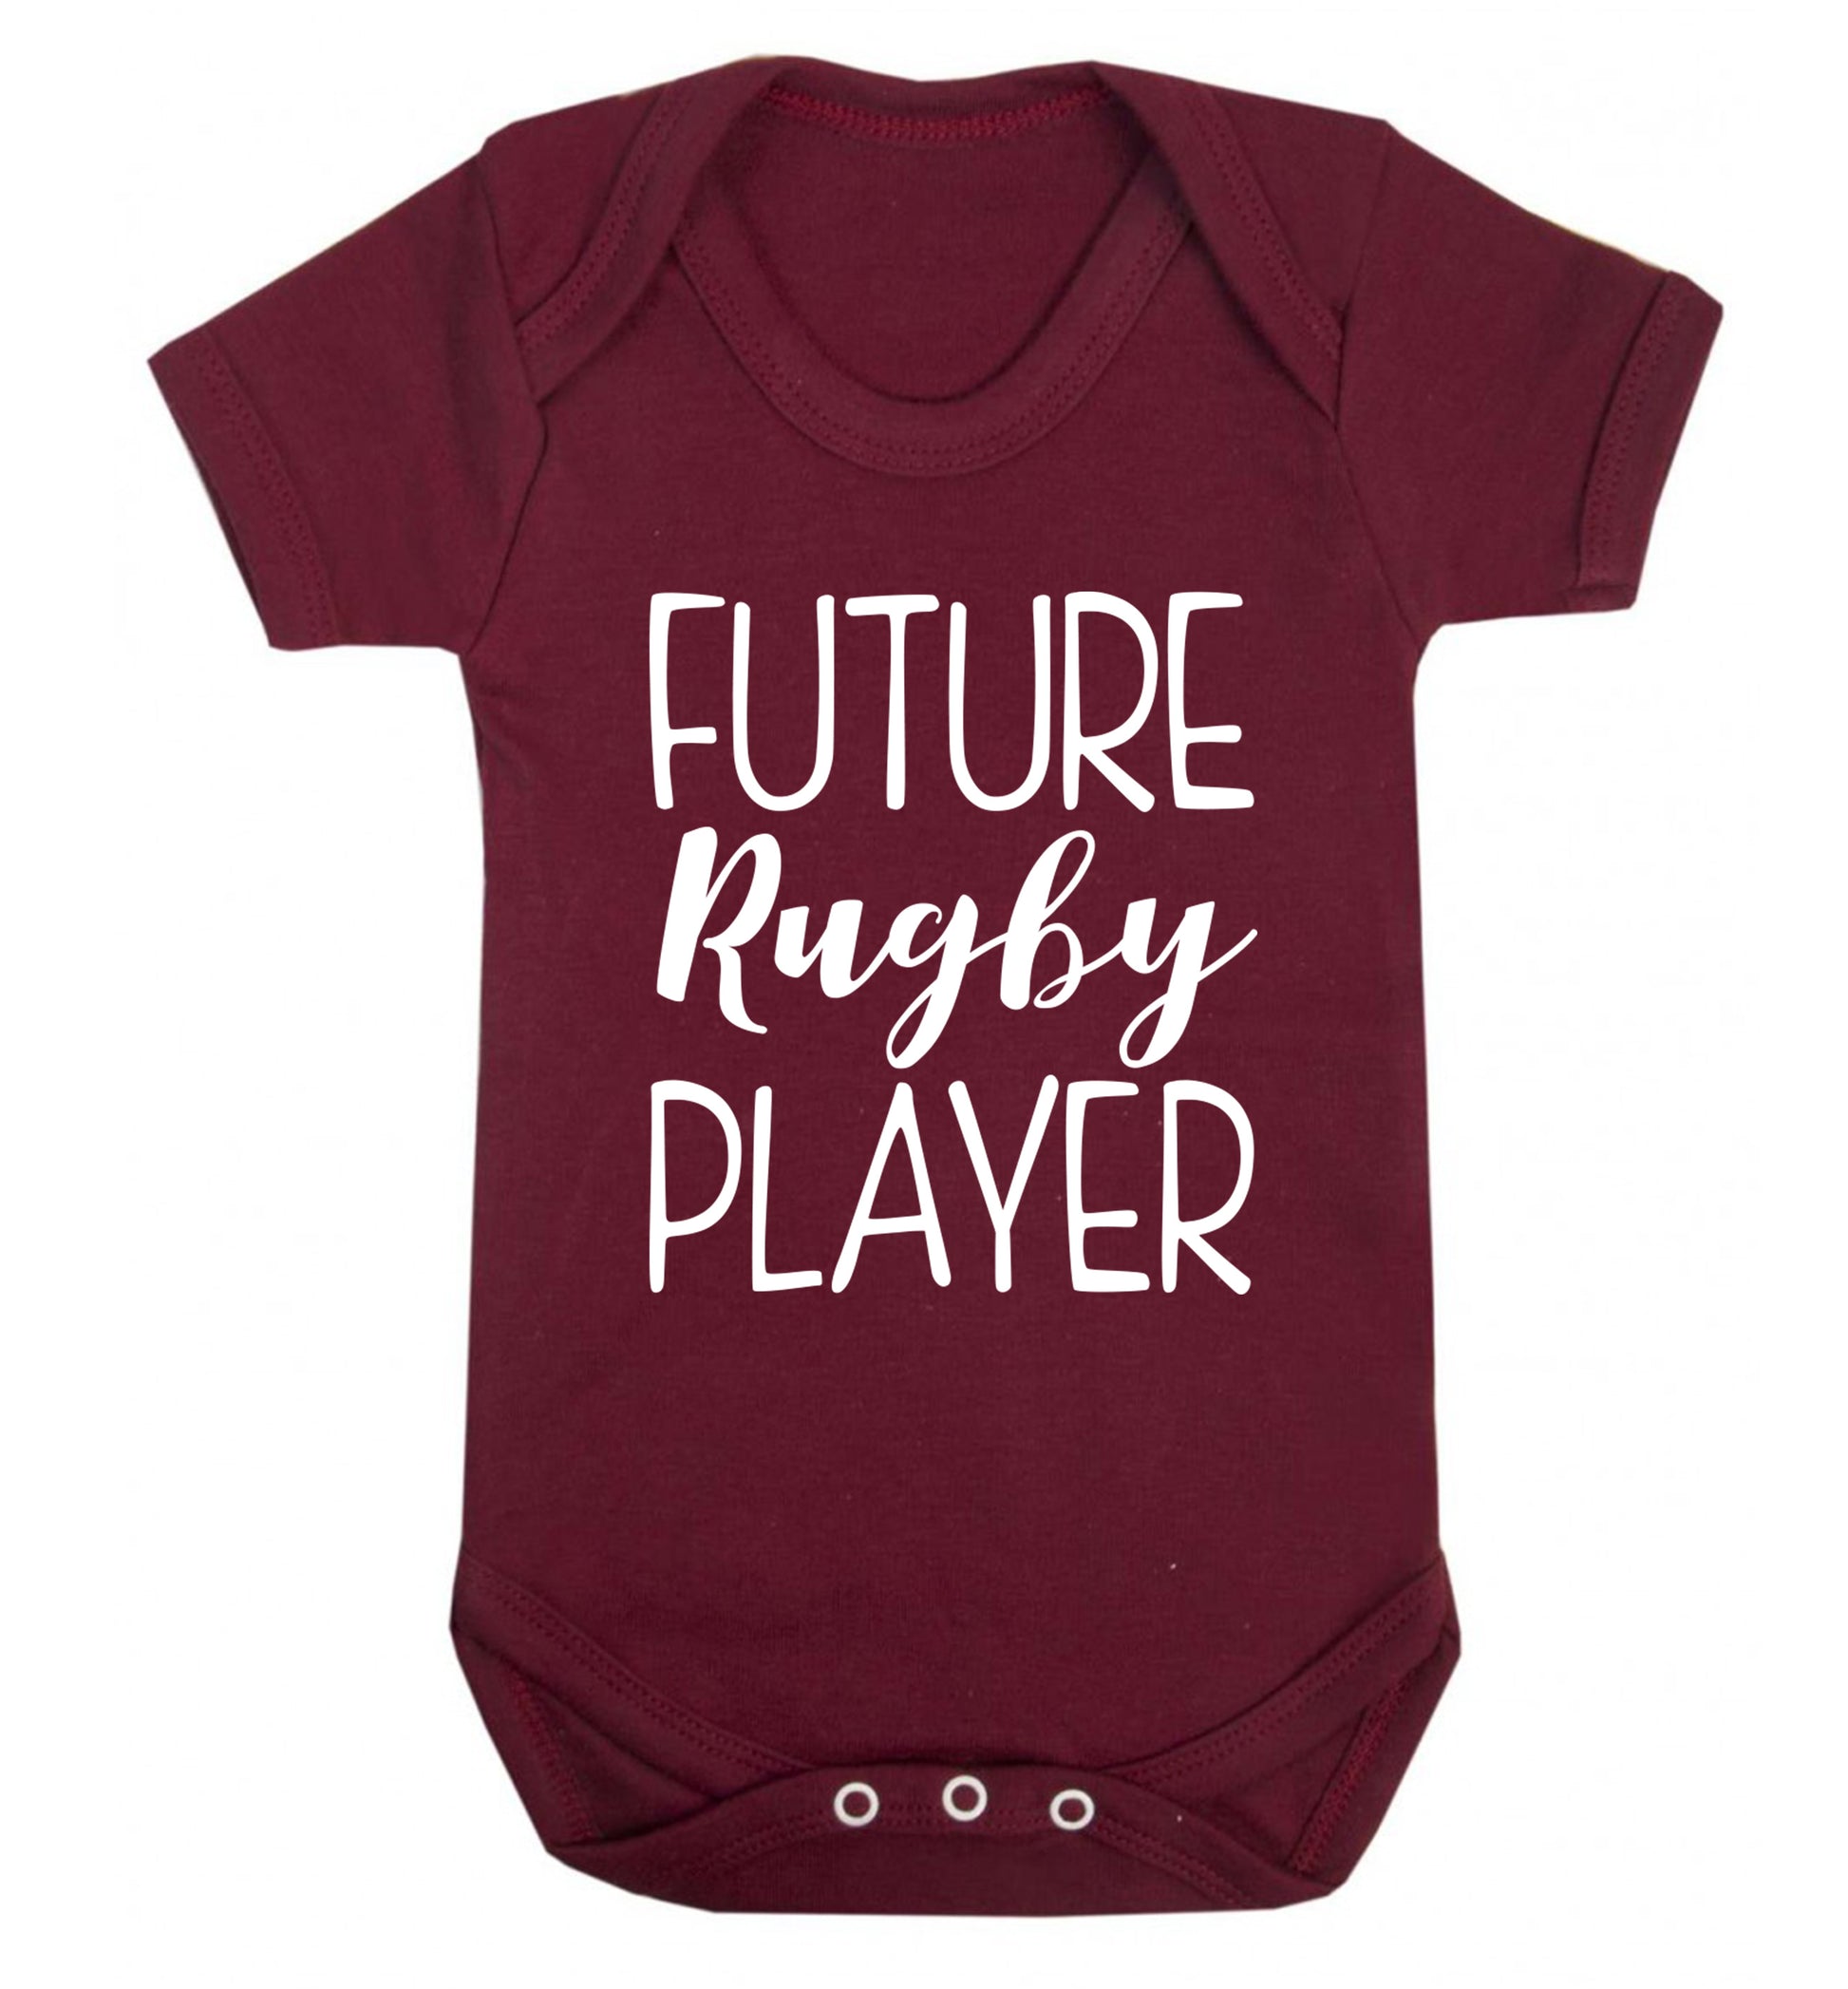 Future rugby player Baby Vest maroon 18-24 months